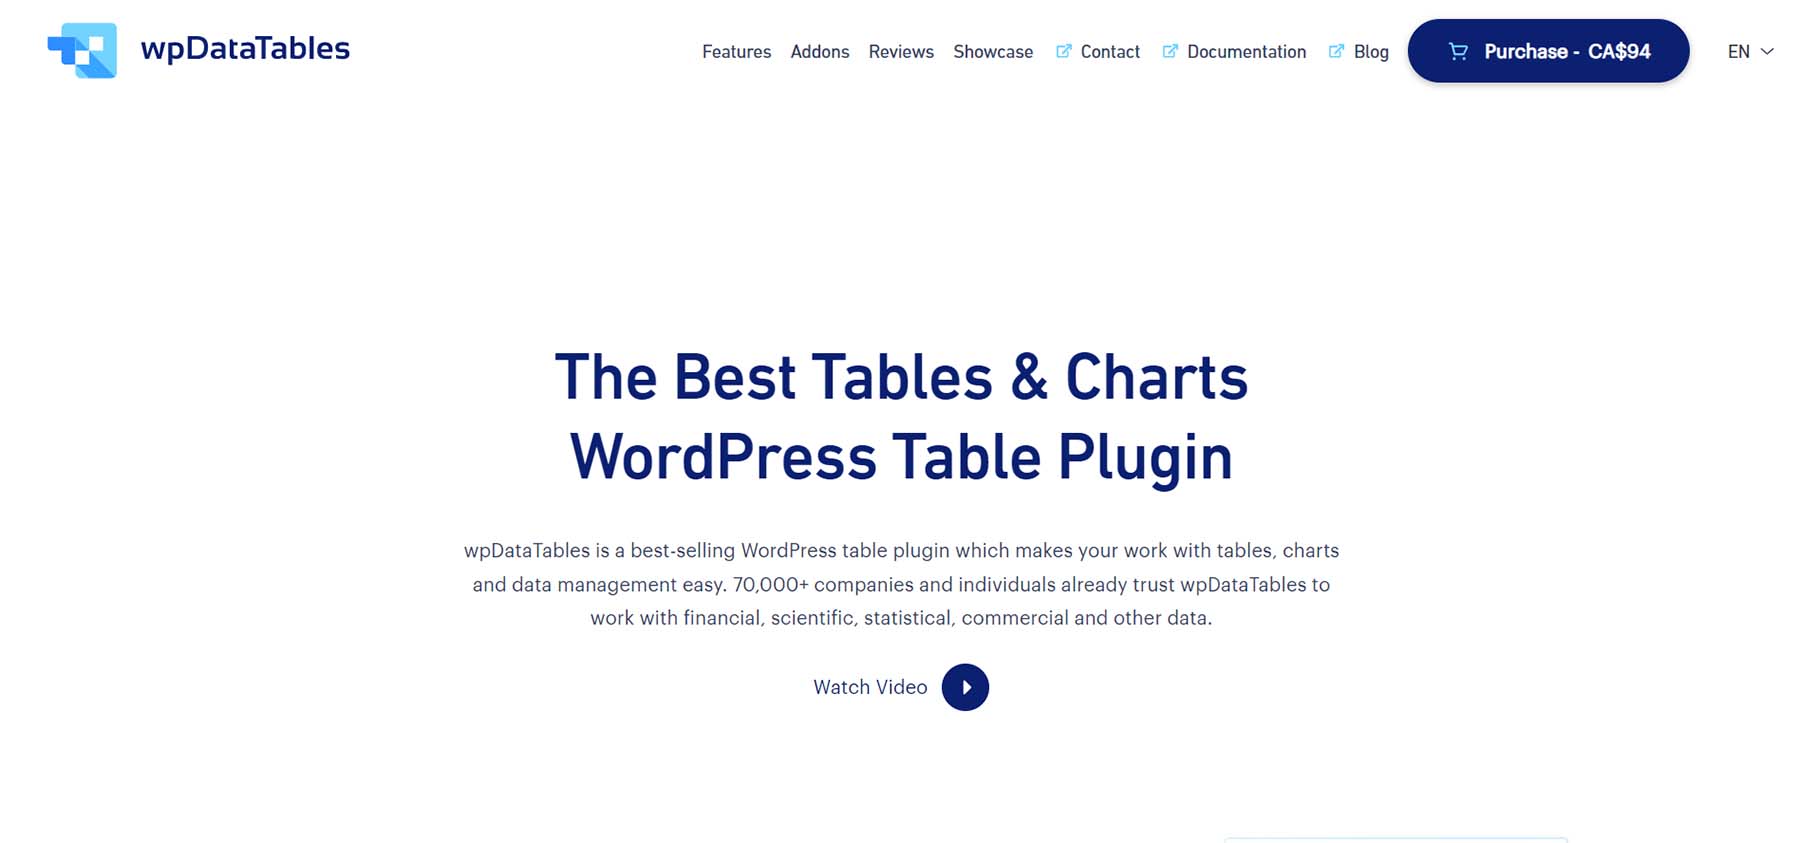 wpdatatables WordPress table and chart plugin